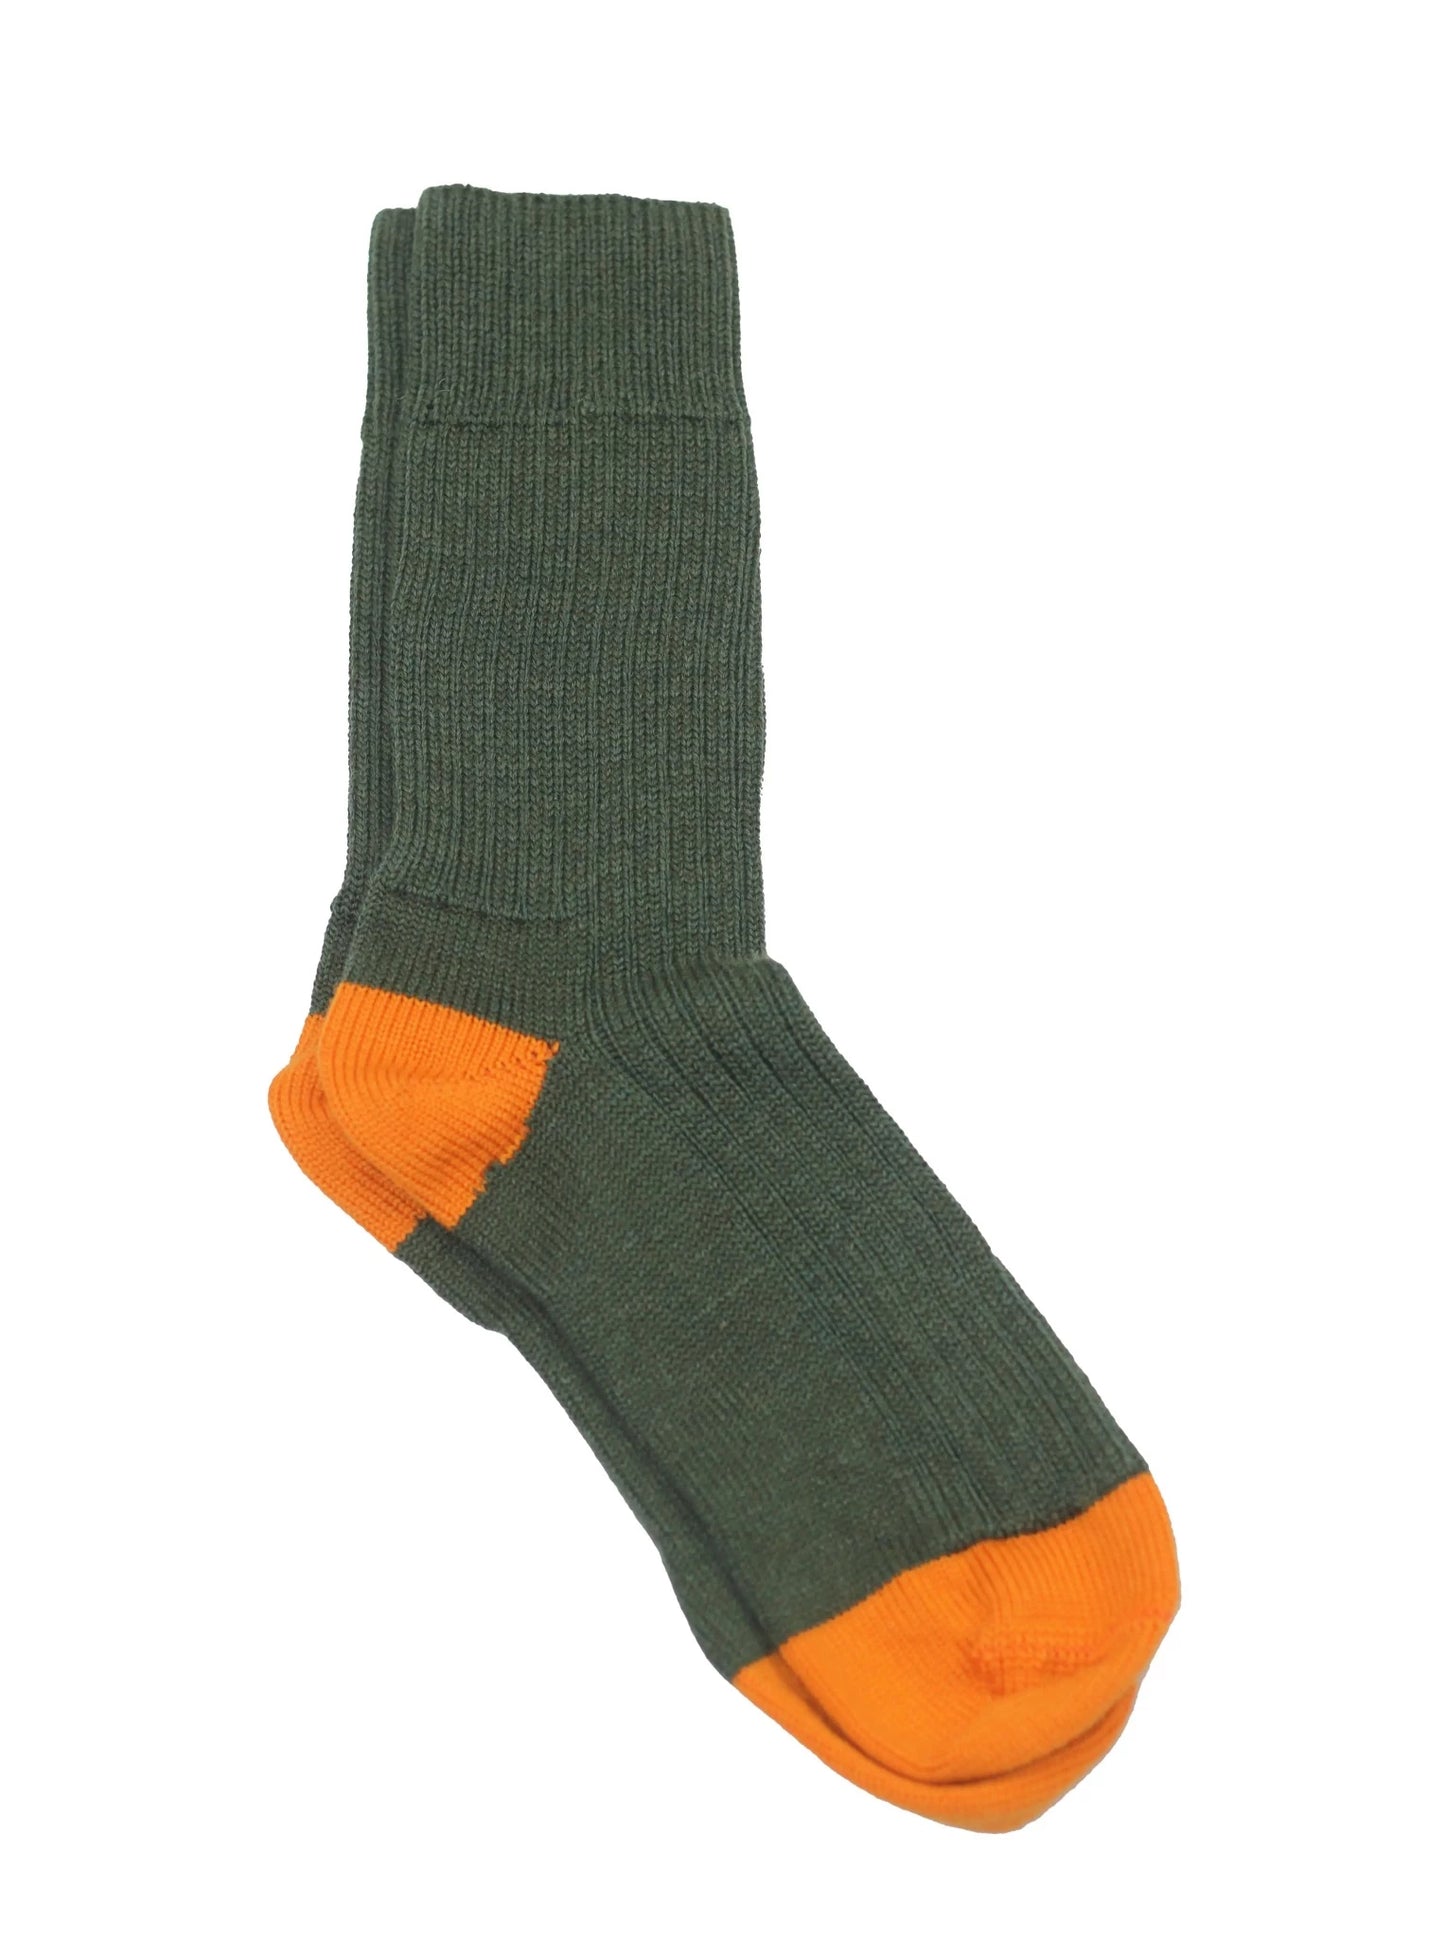 Load image into Gallery viewer, wool socks for men and women in high merino wool content in green and orange from Misty Cashmere
